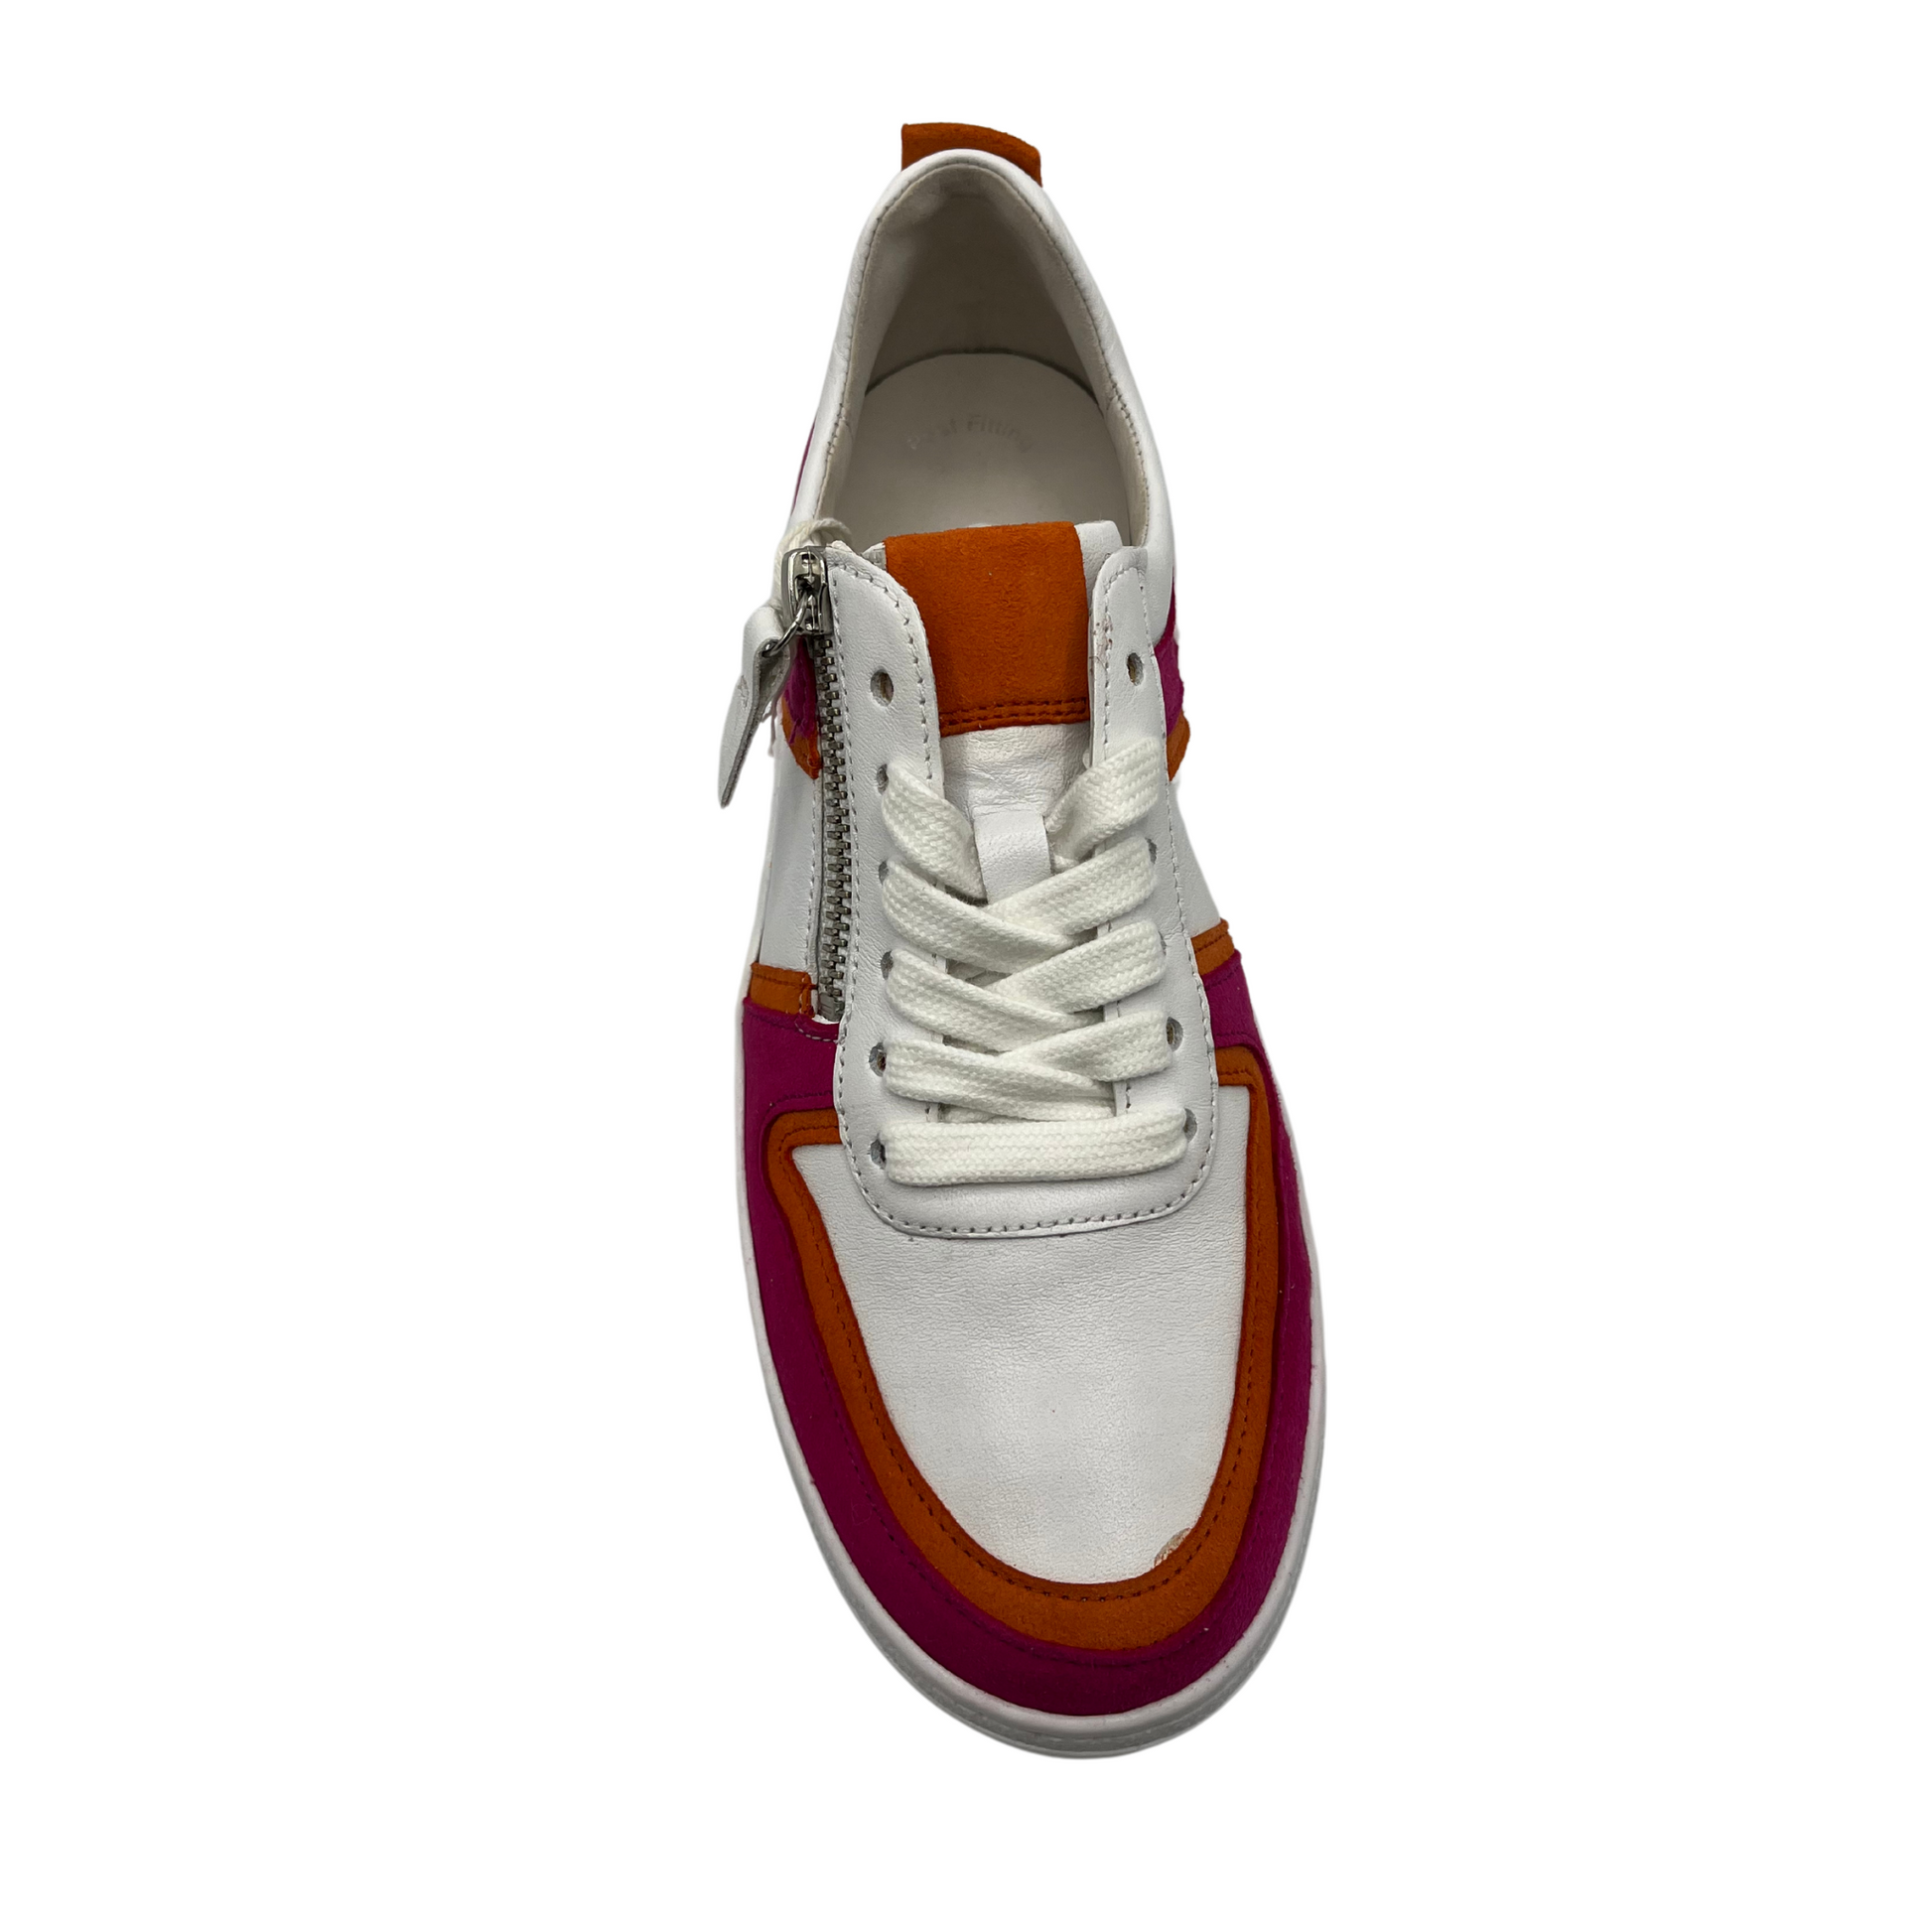 Top view of white, fuchsia and orange sneaker with white laces and rubber outsole.